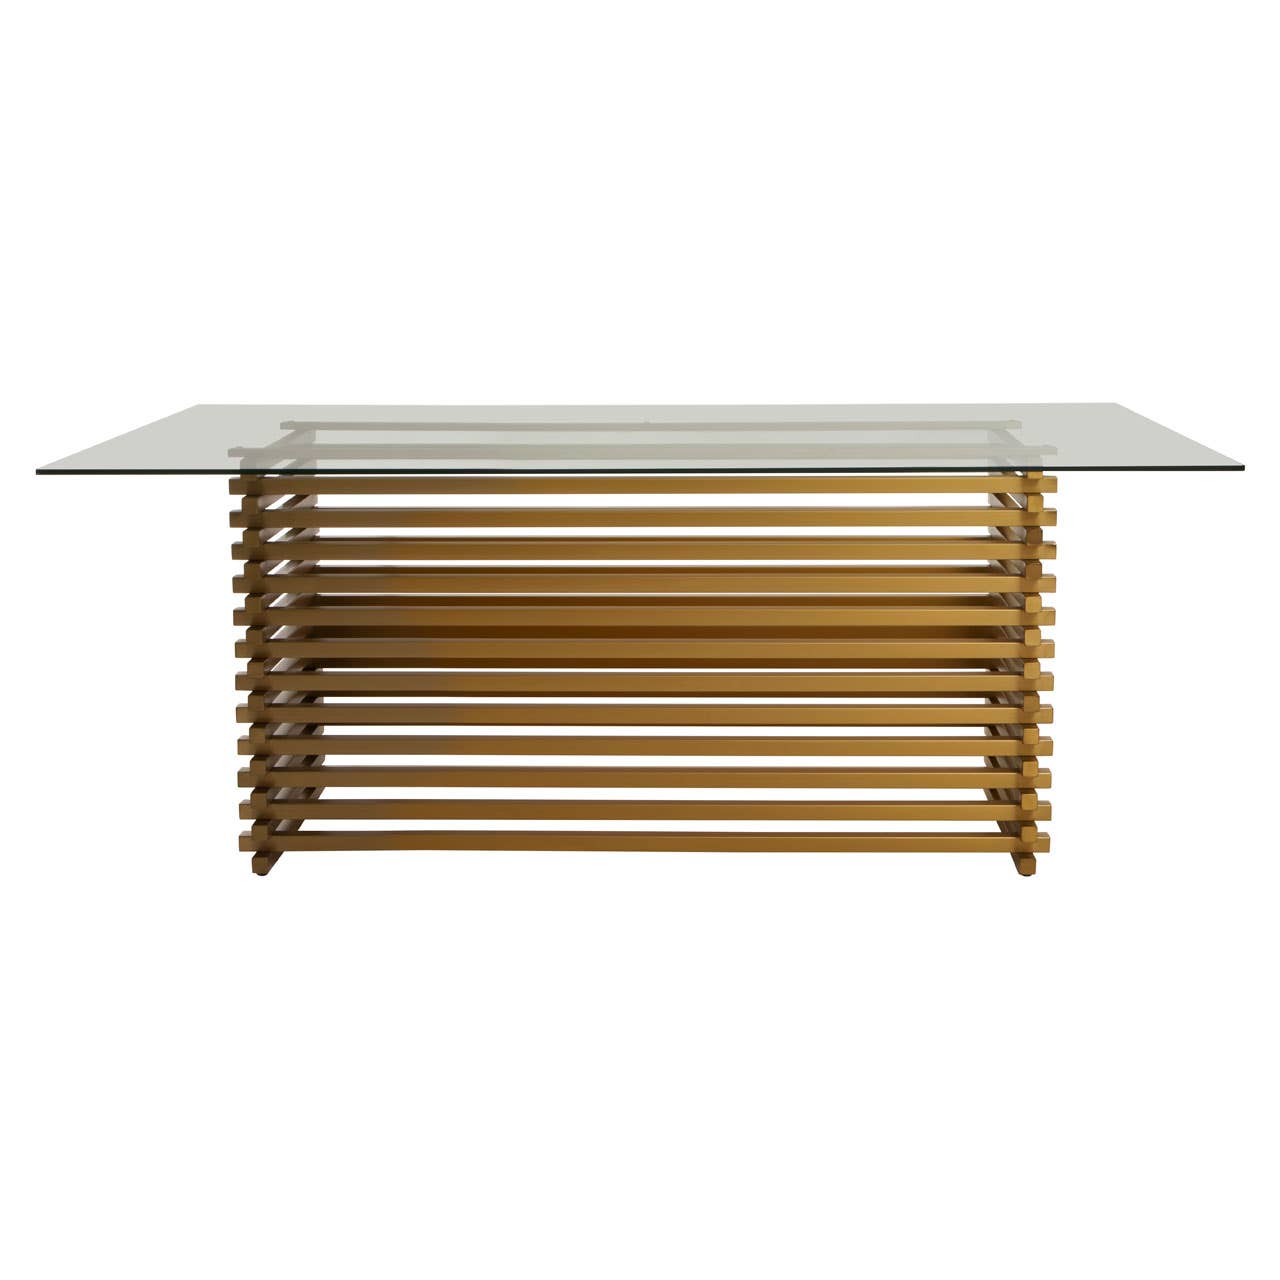 VOGUE MATTE GOLD DINING TABLE